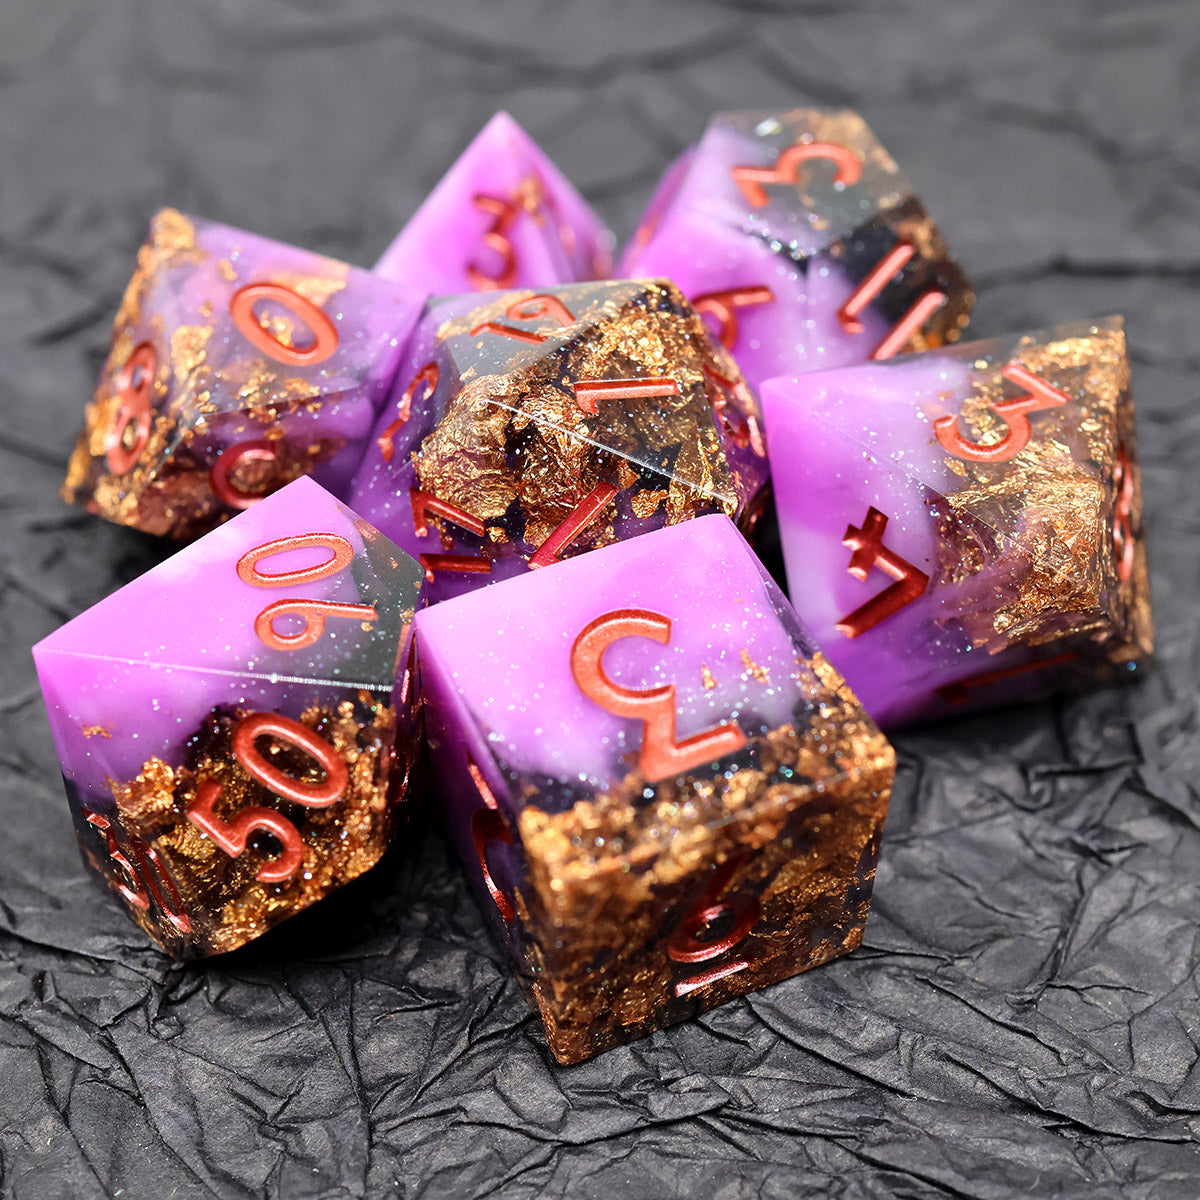 sharp edge dnd TTRPG dice sets for role playing games and dice goblin collectors